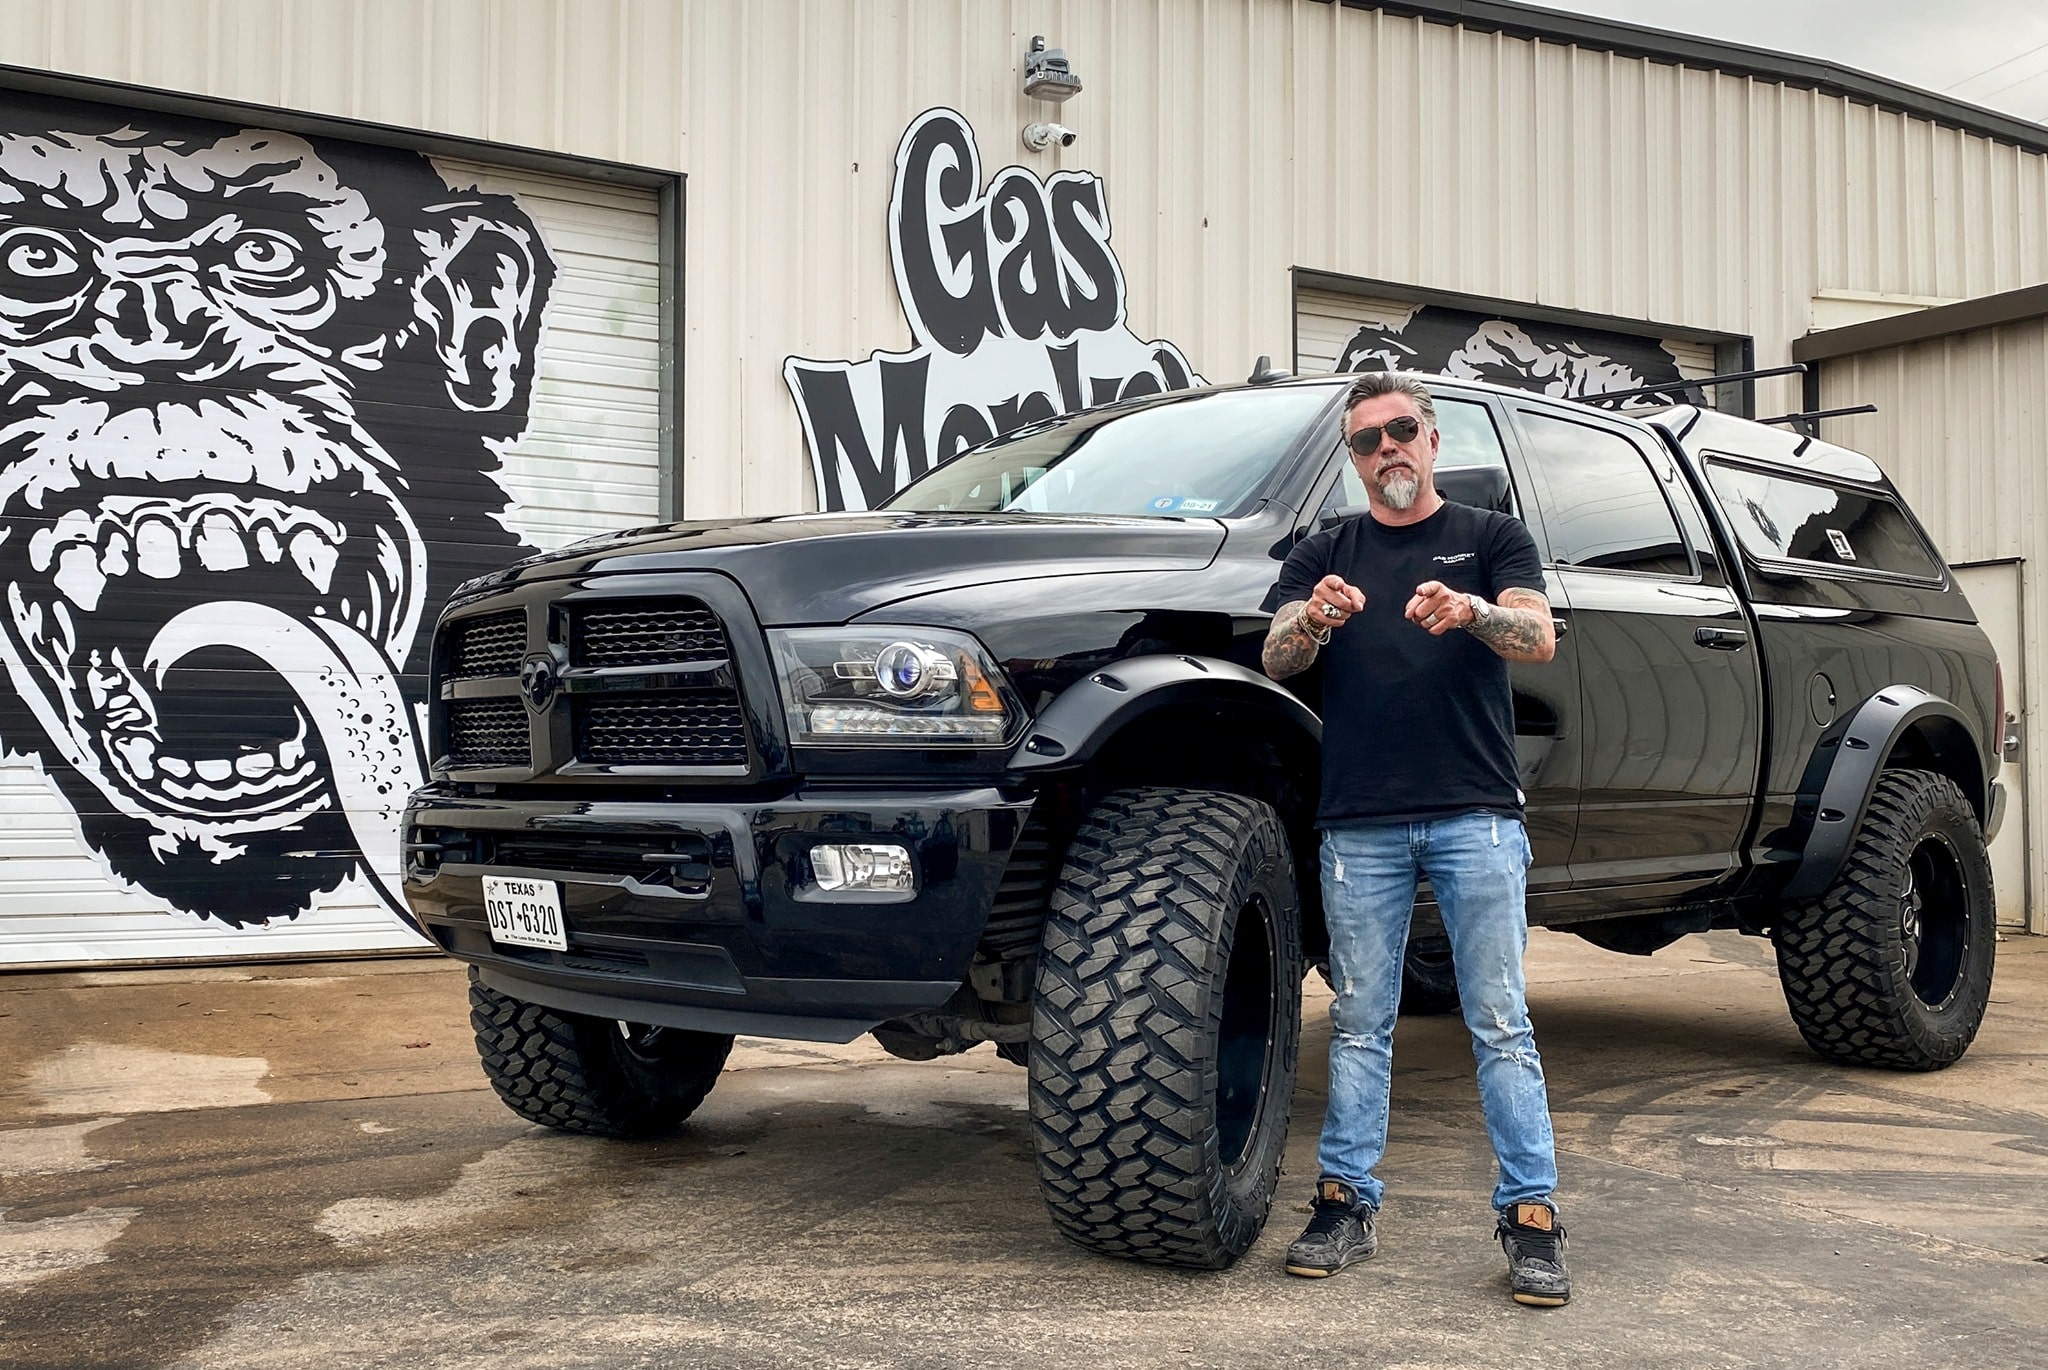 Richard Rawlings' Massive Net Worth - Nine Expensive Cars and House in Texas